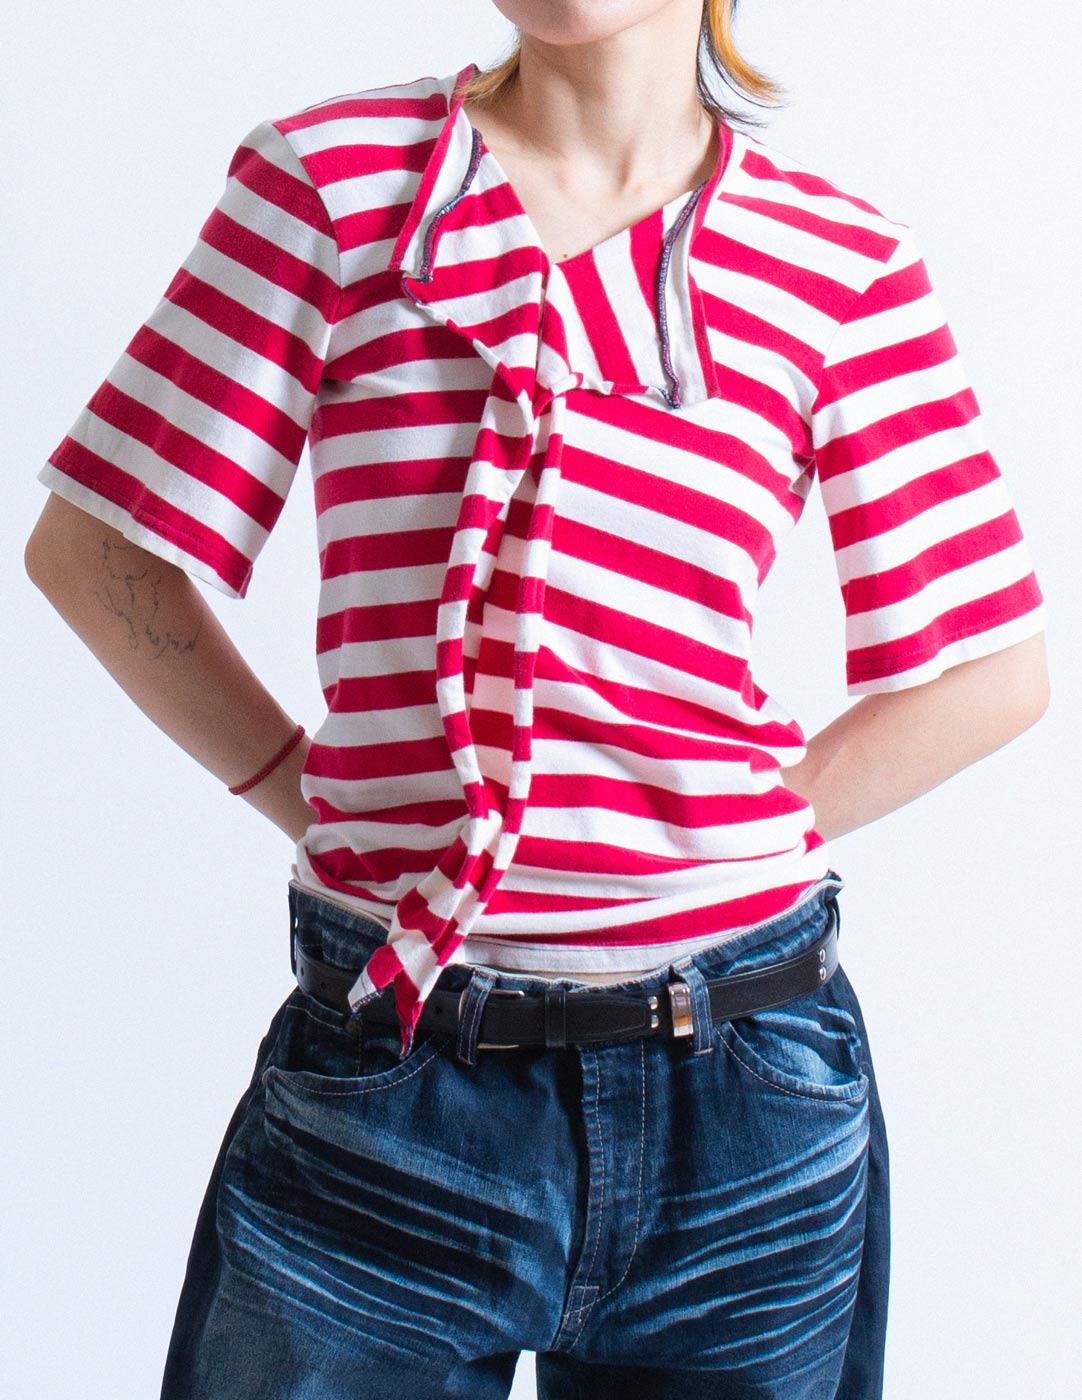 Jean Paul Gaultier vintage striped anchor tee front detail